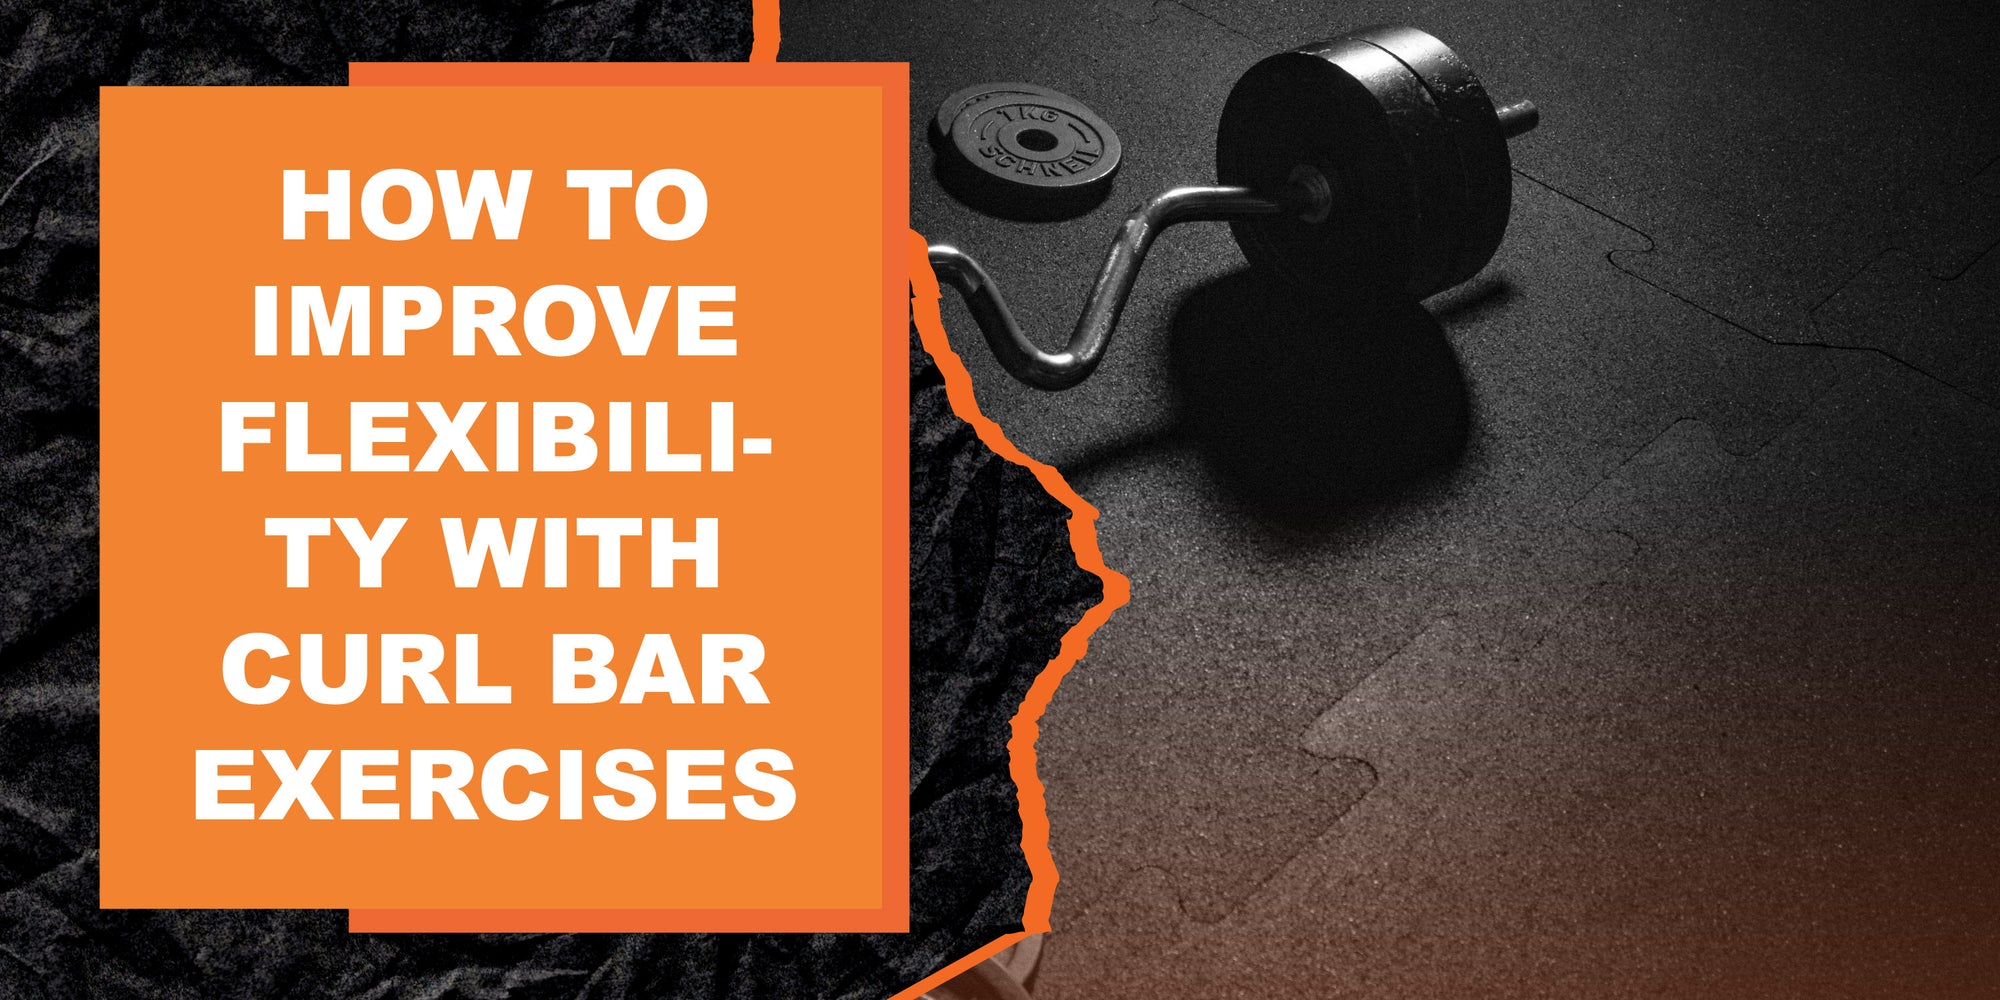 How to Improve Flexibility with Curl Bar Exercises